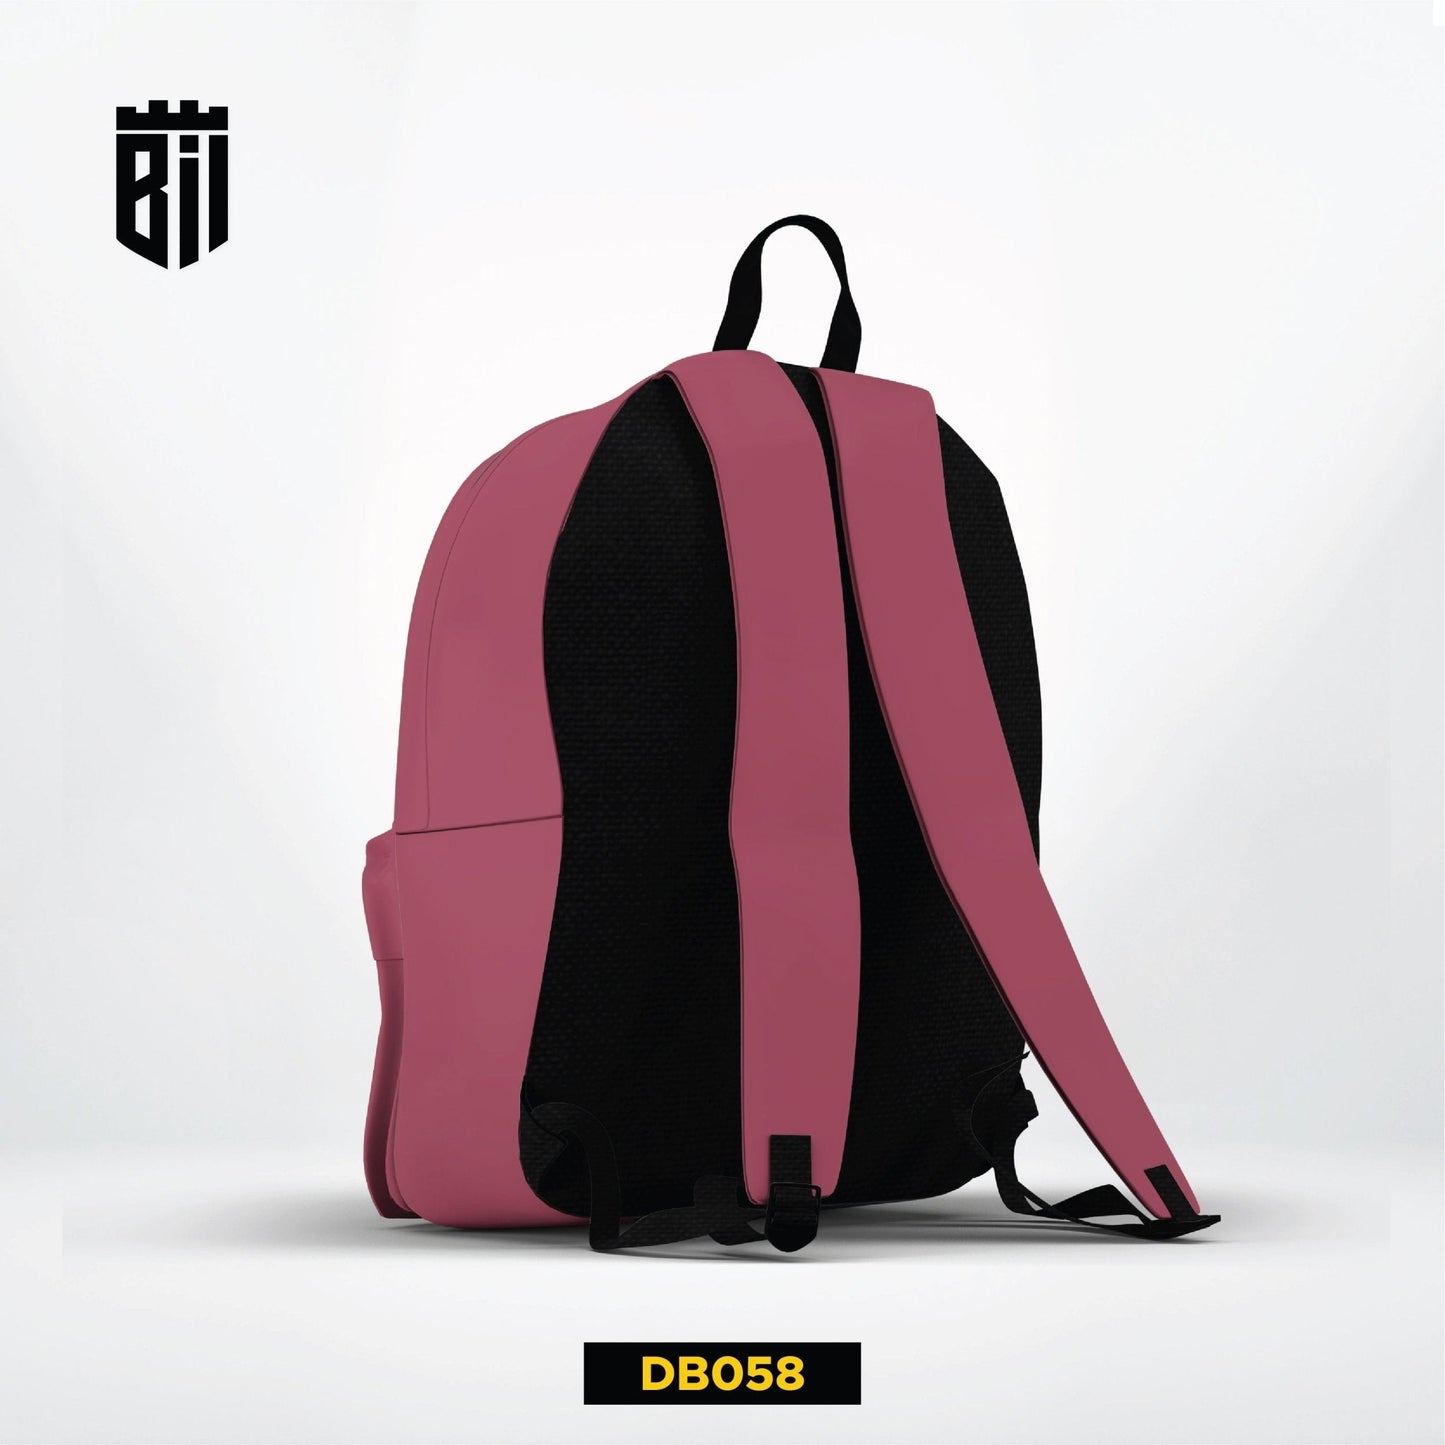 DB058 Maroon Allover Printed Backpack - BREACHIT